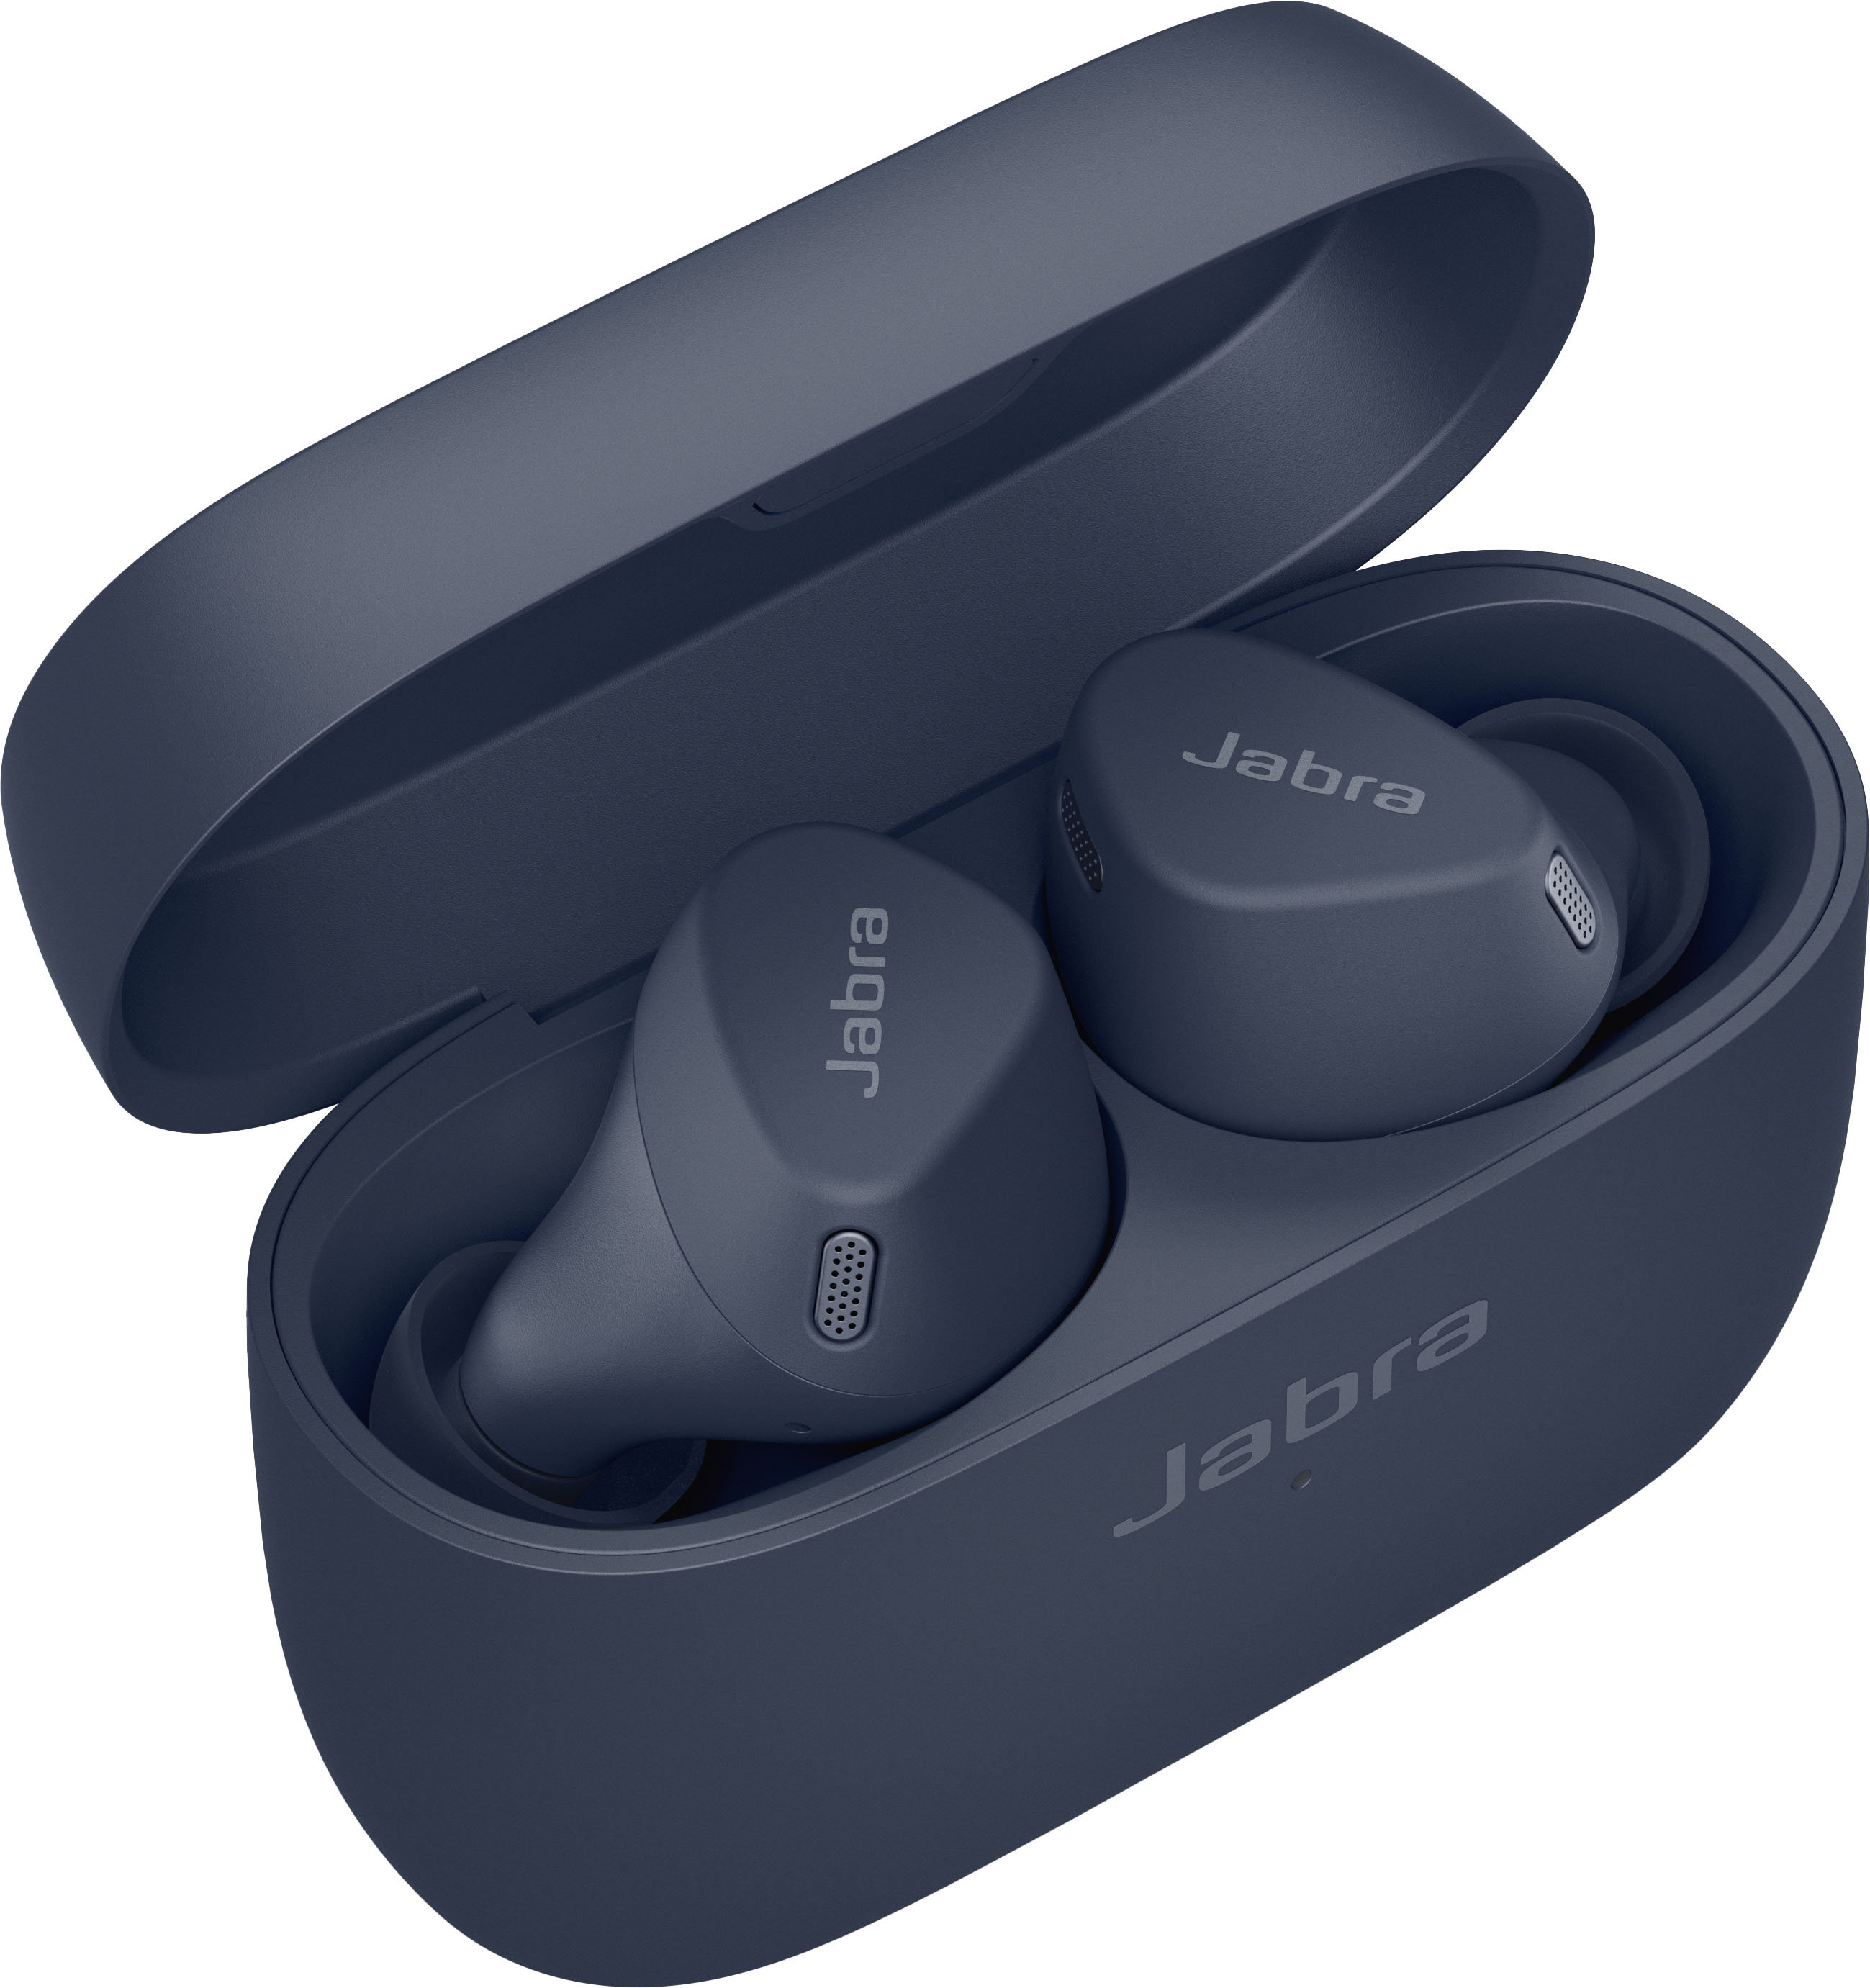 Angle View: Jabra - Elite 4 Active True Wireless Noise Cancelling In-Ear Headphones - Navy